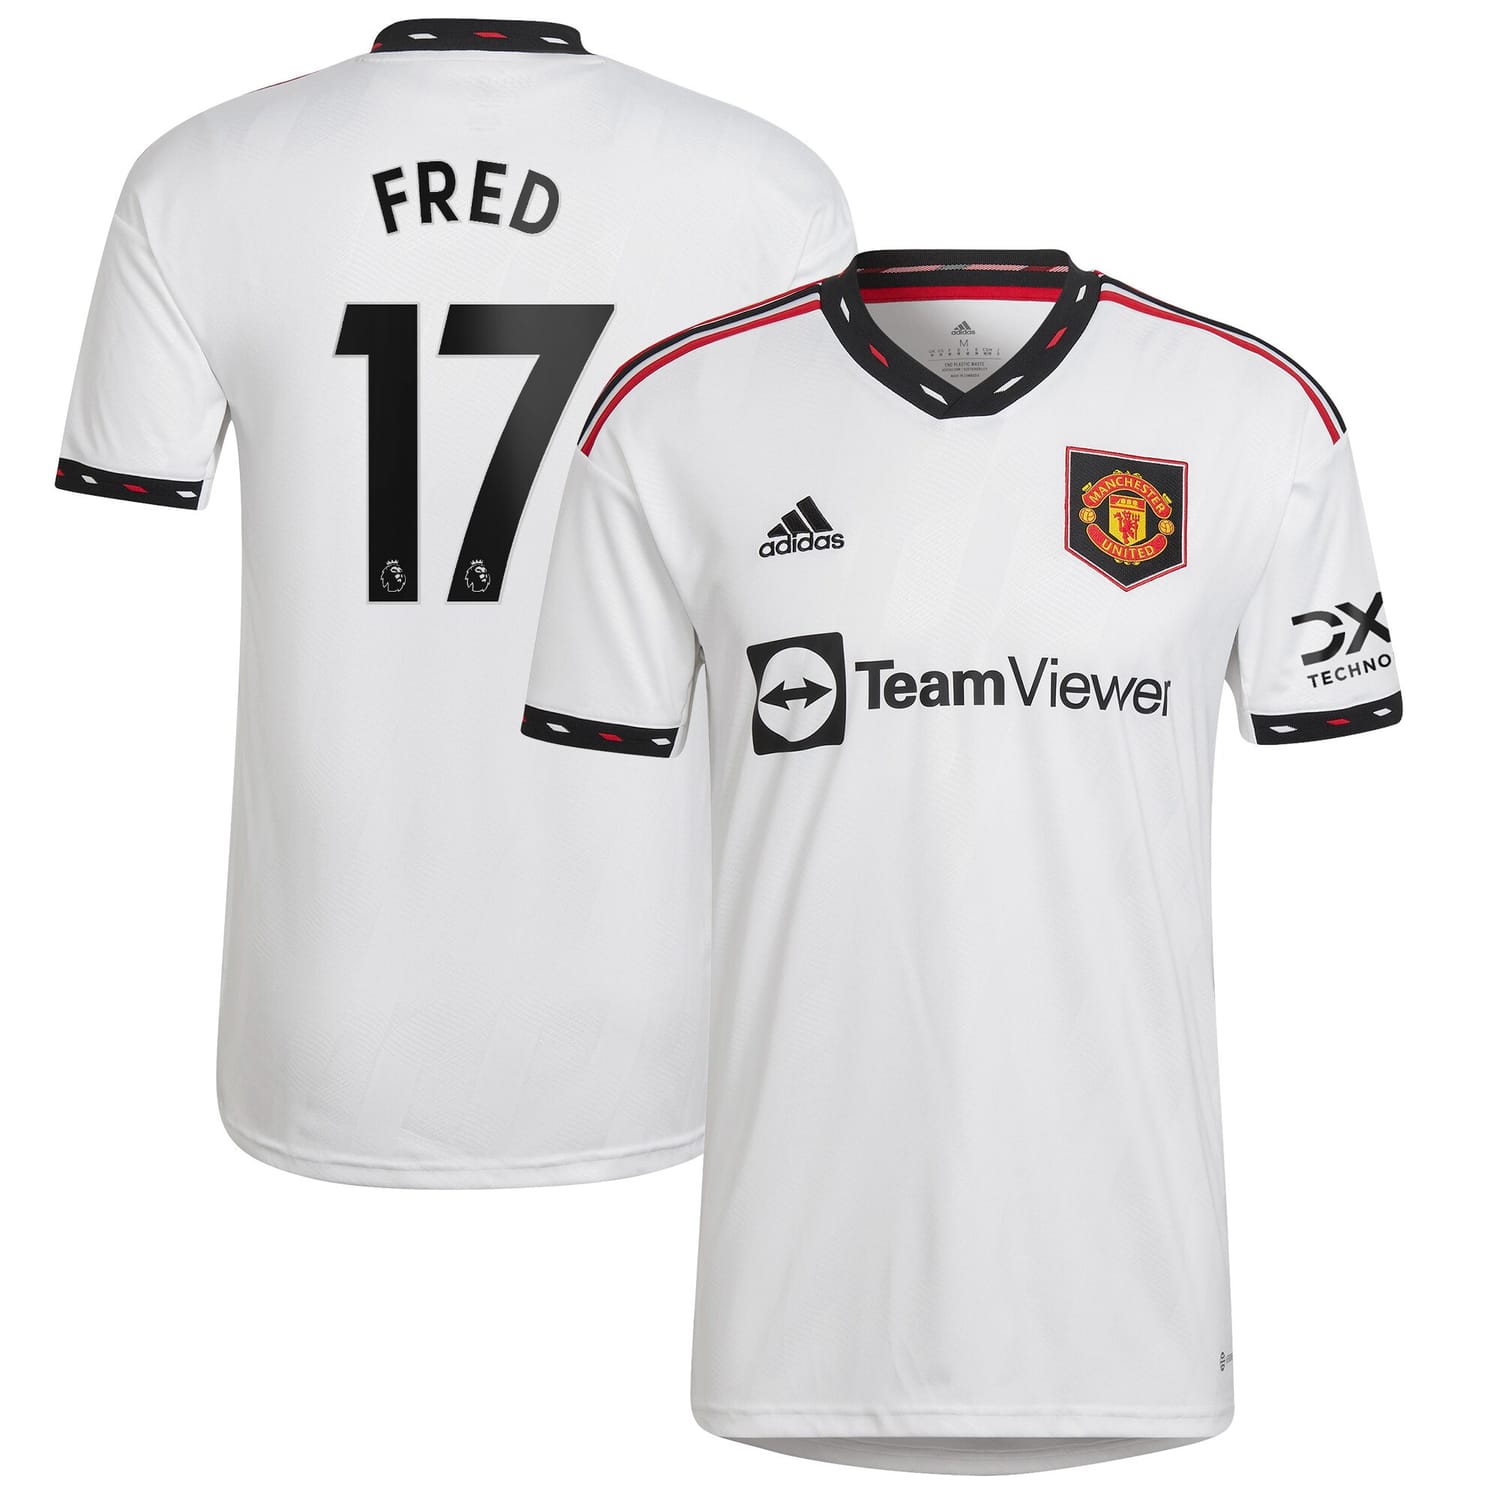 Premier League Manchester United Away Jersey Shirt White 2022-23 player Fred printing for Men